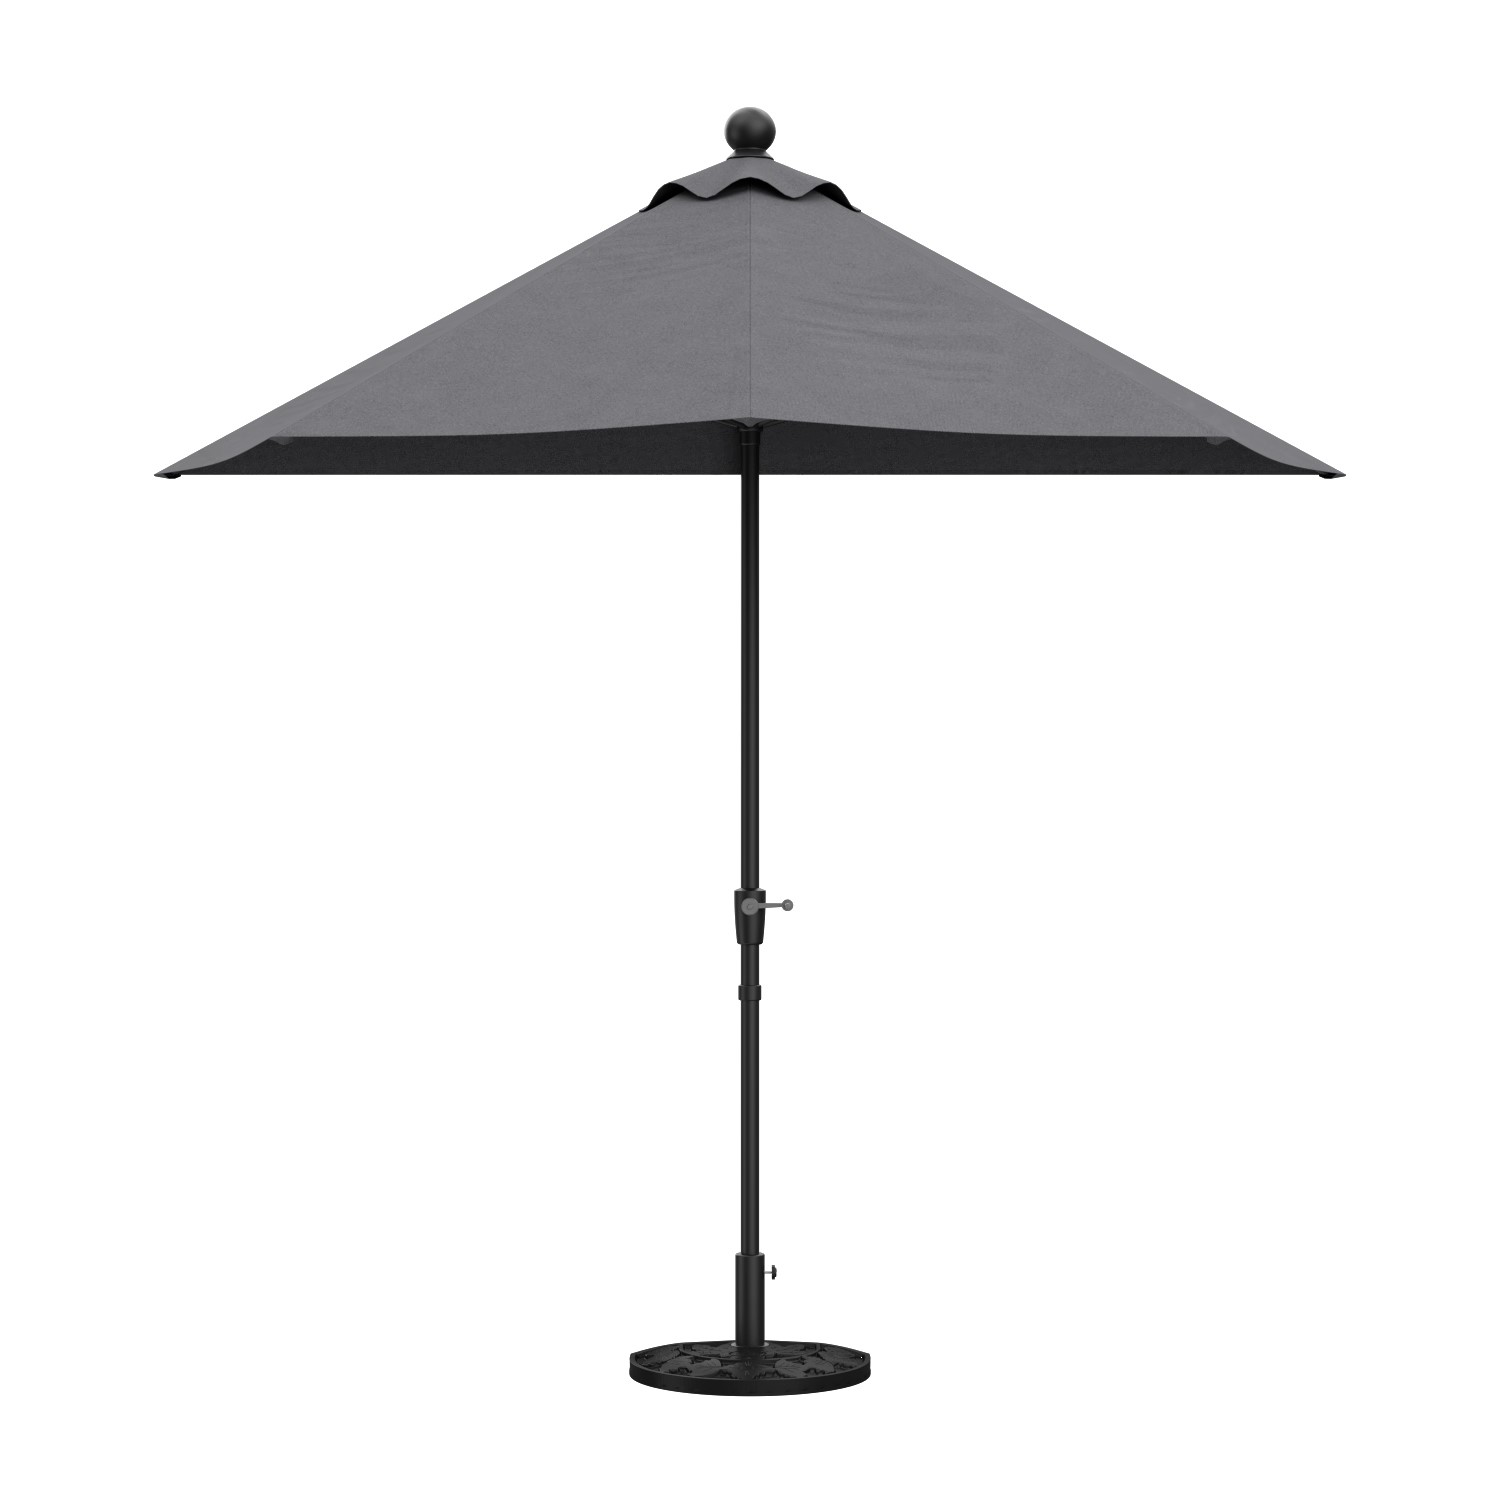 Dark Grey Half Parasol Weighted Base and Cover Included - 2.6m x 1.3m - Fortrose - Furniture123